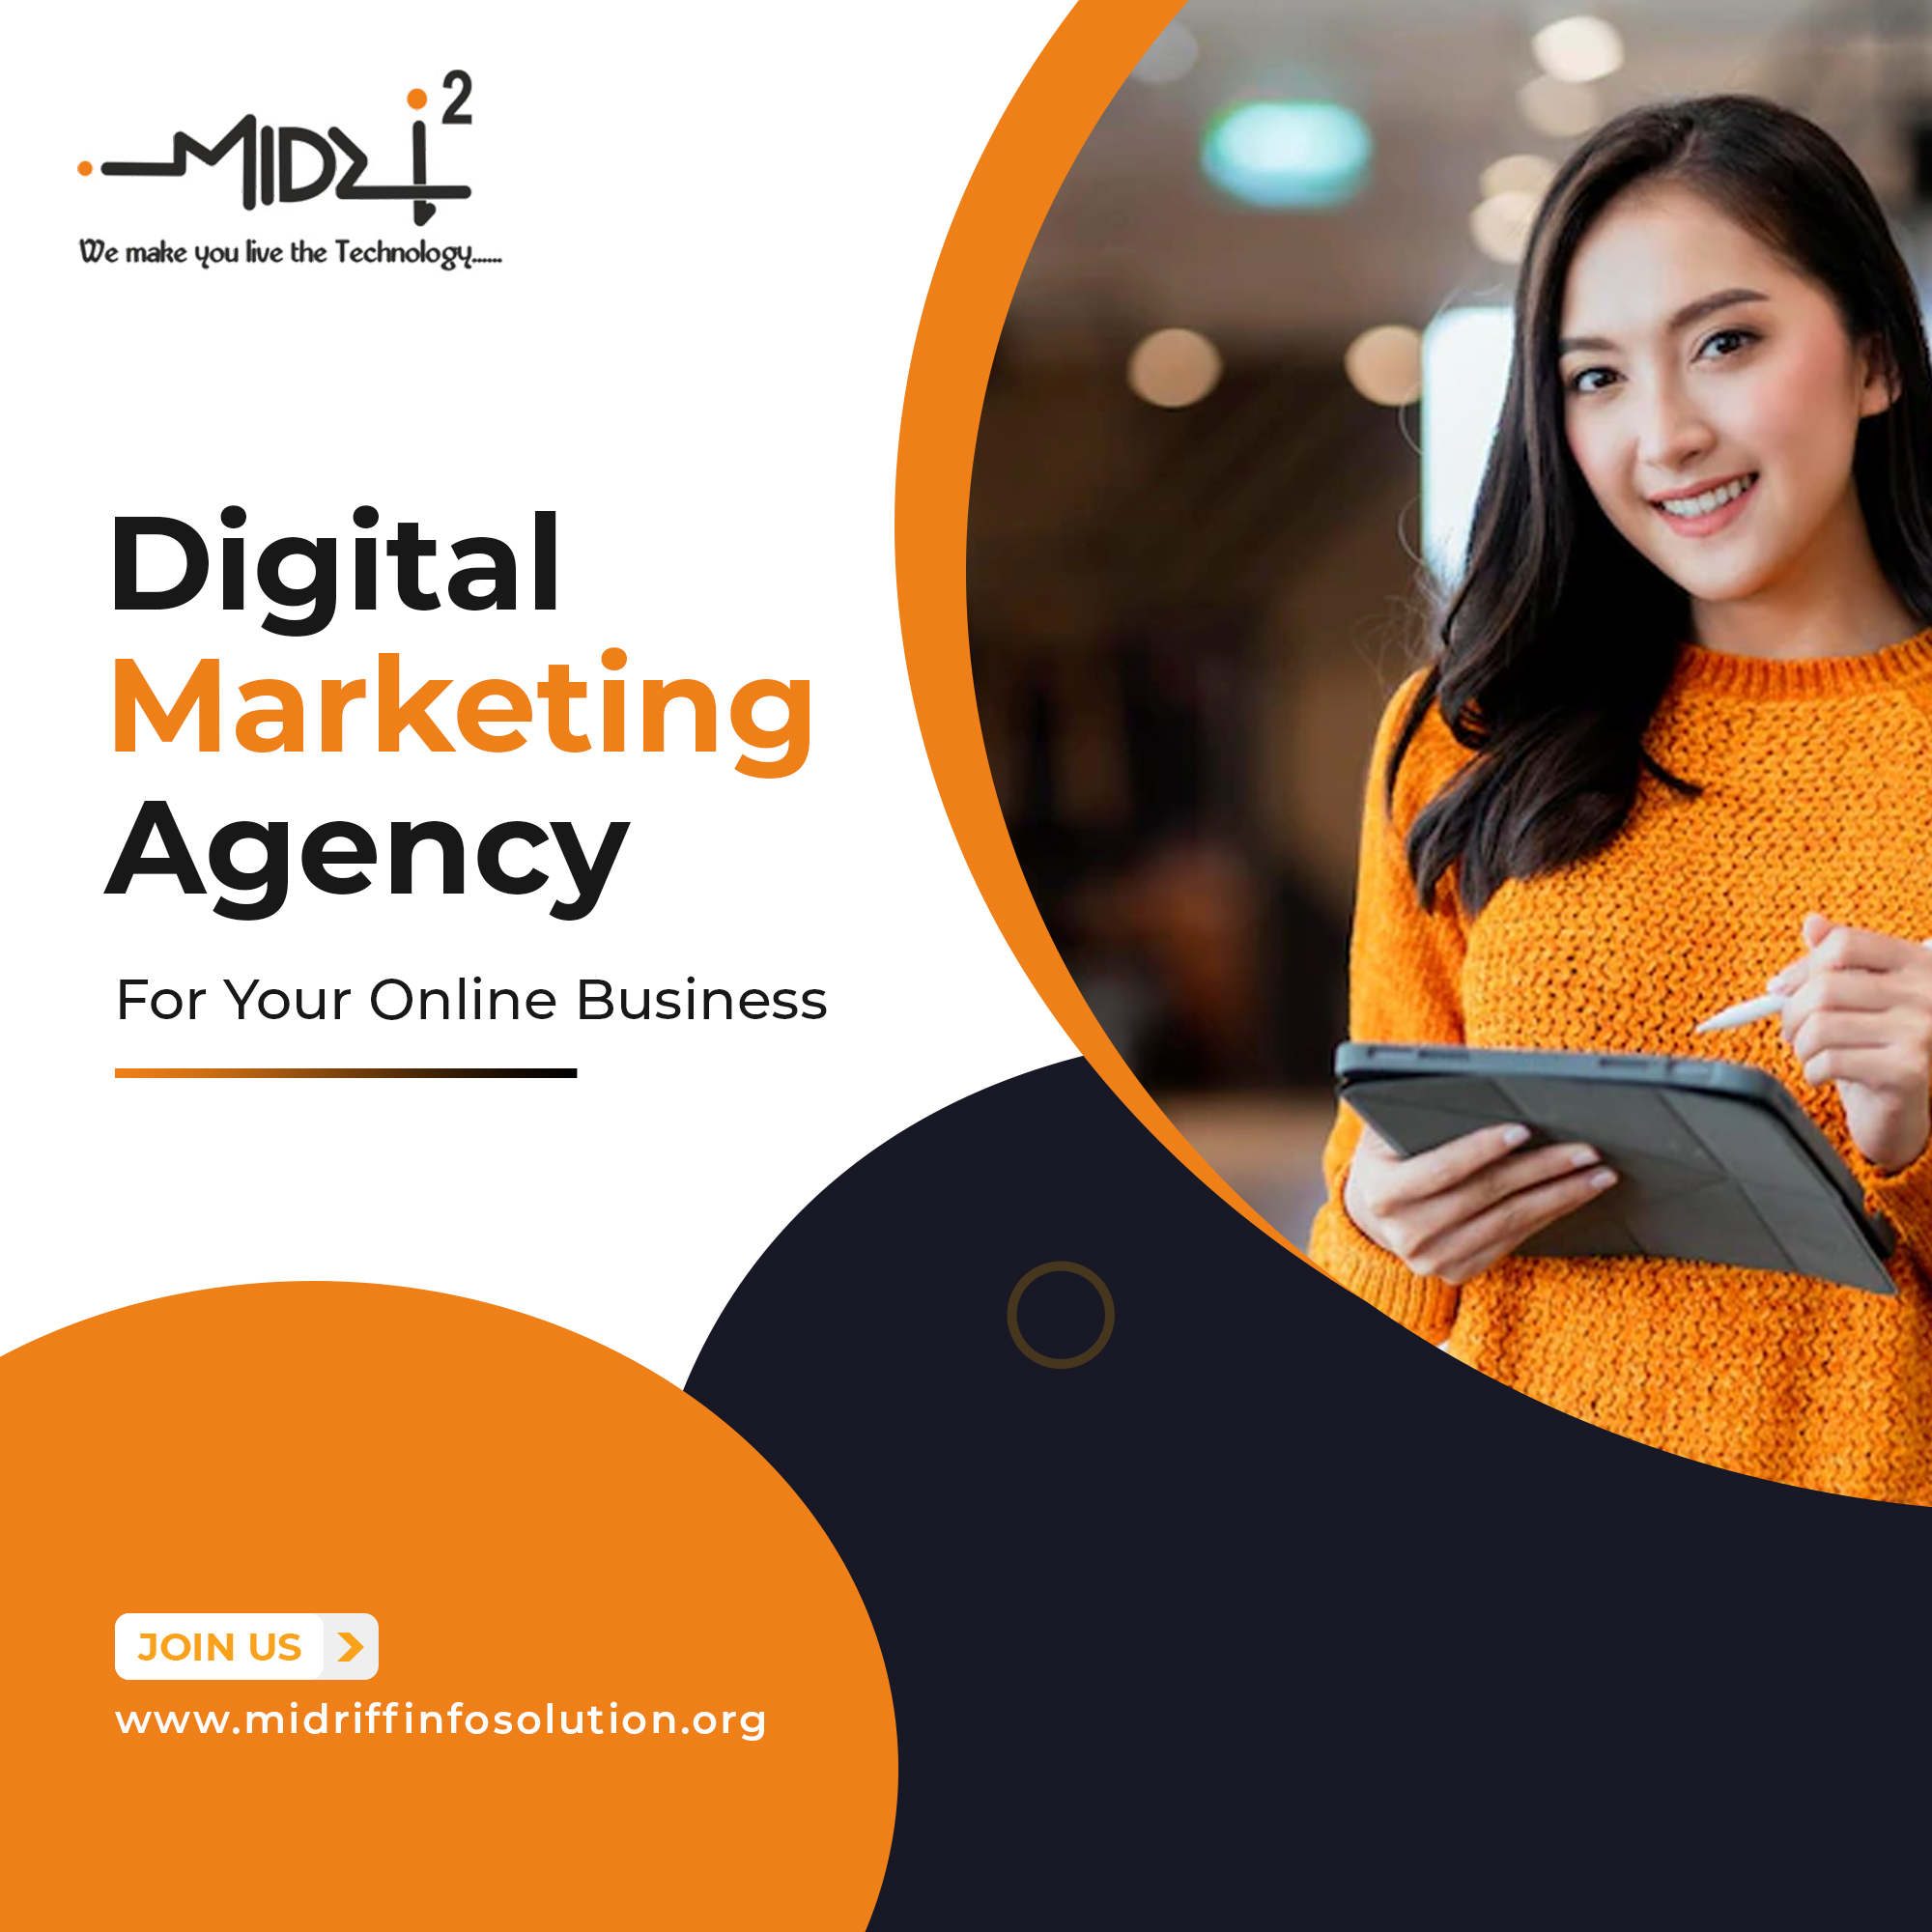 How To Find the Right Digital Marketing Agency For Your Online Business?